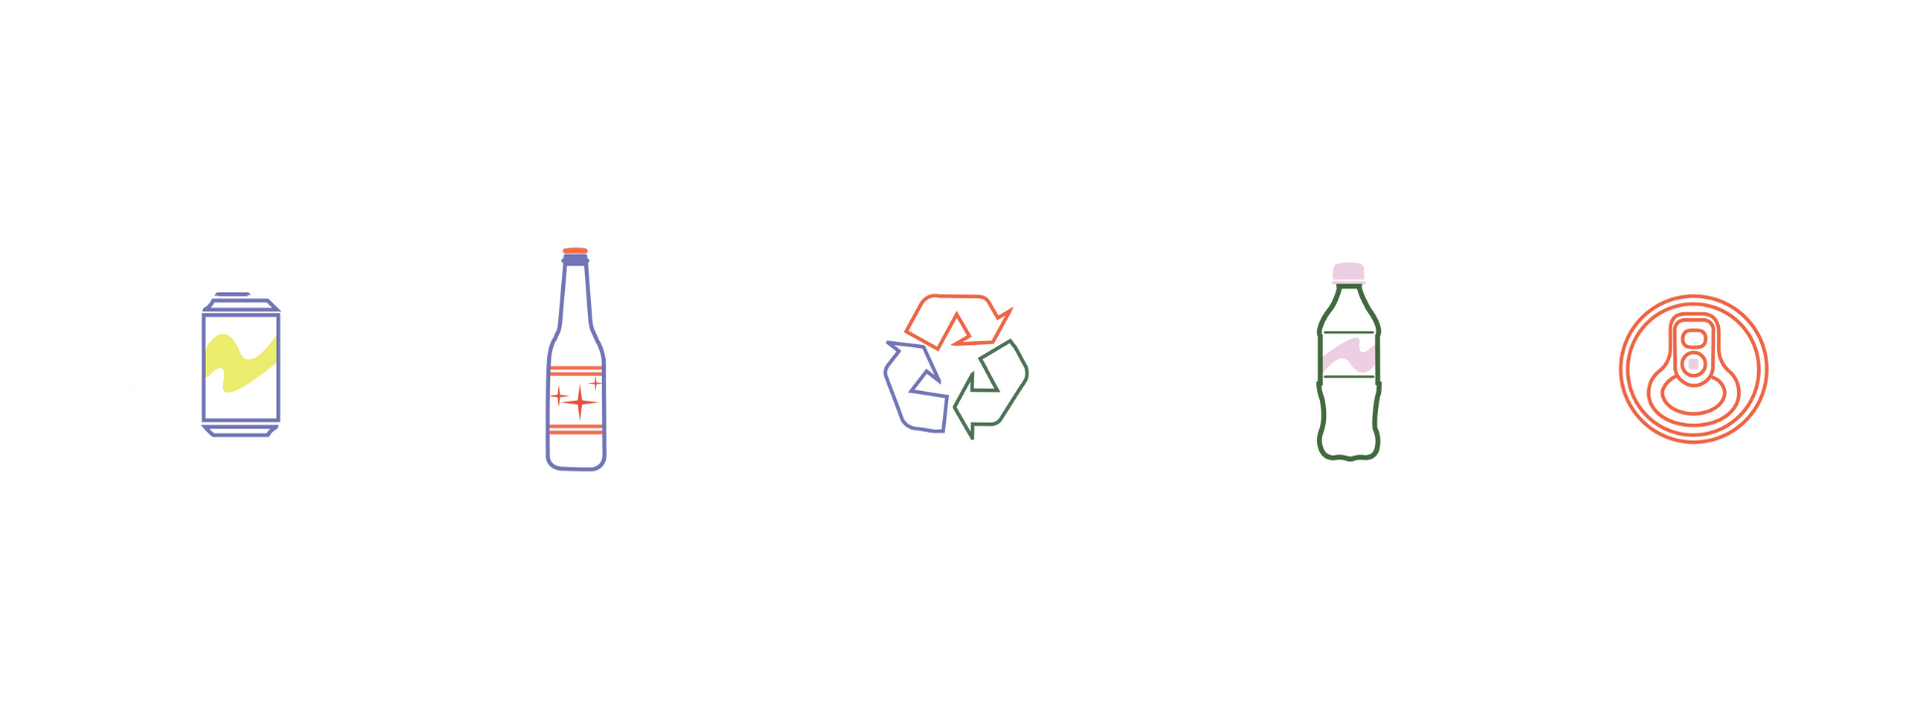 A set of recycling icons on a white background.